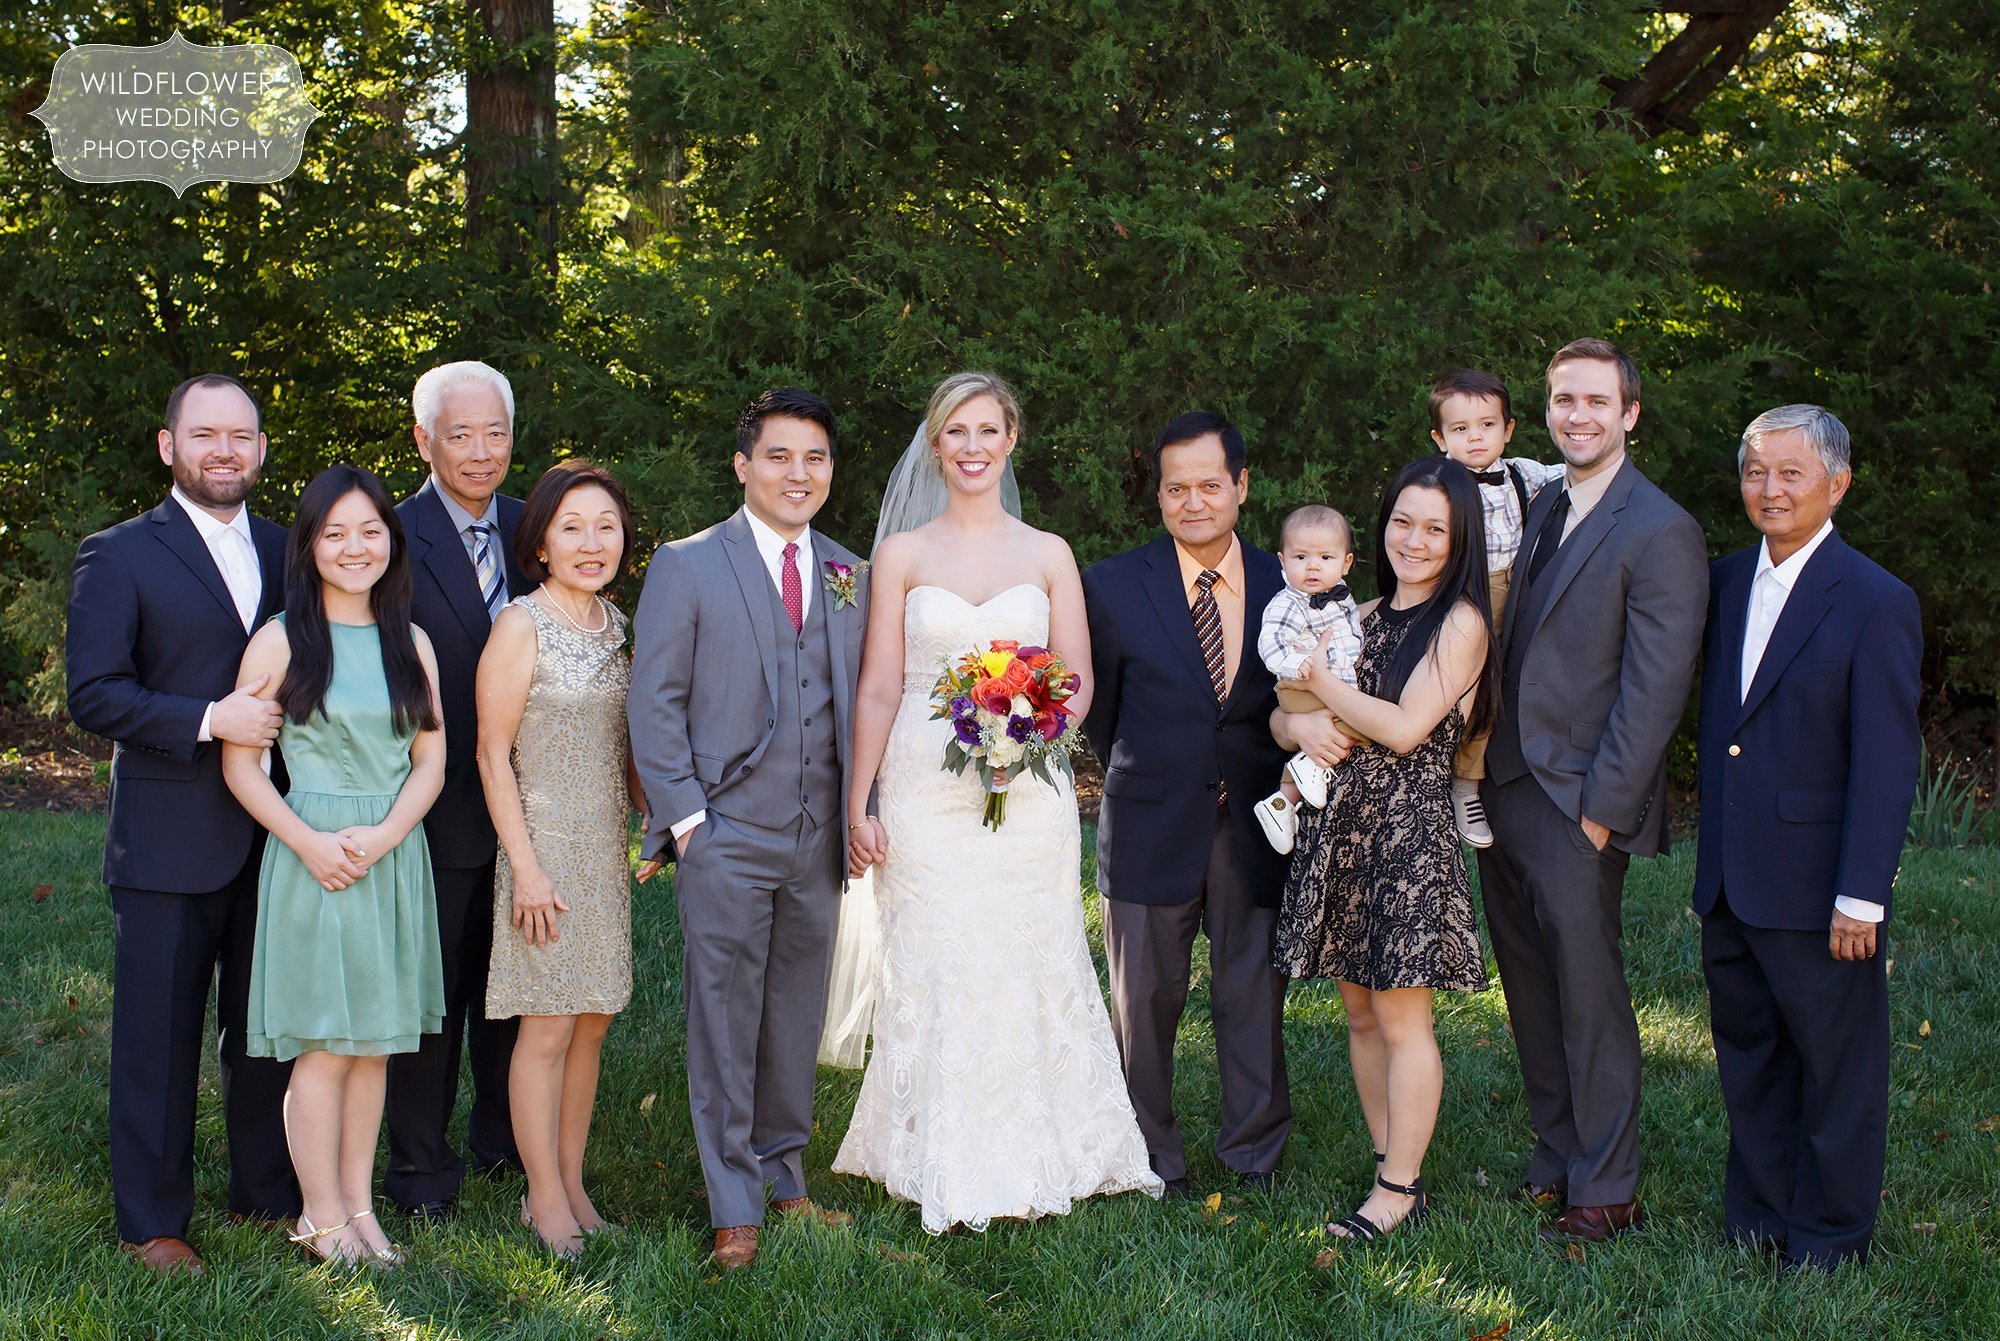 Clean and simple family photo at this Missouri backyard wedding.